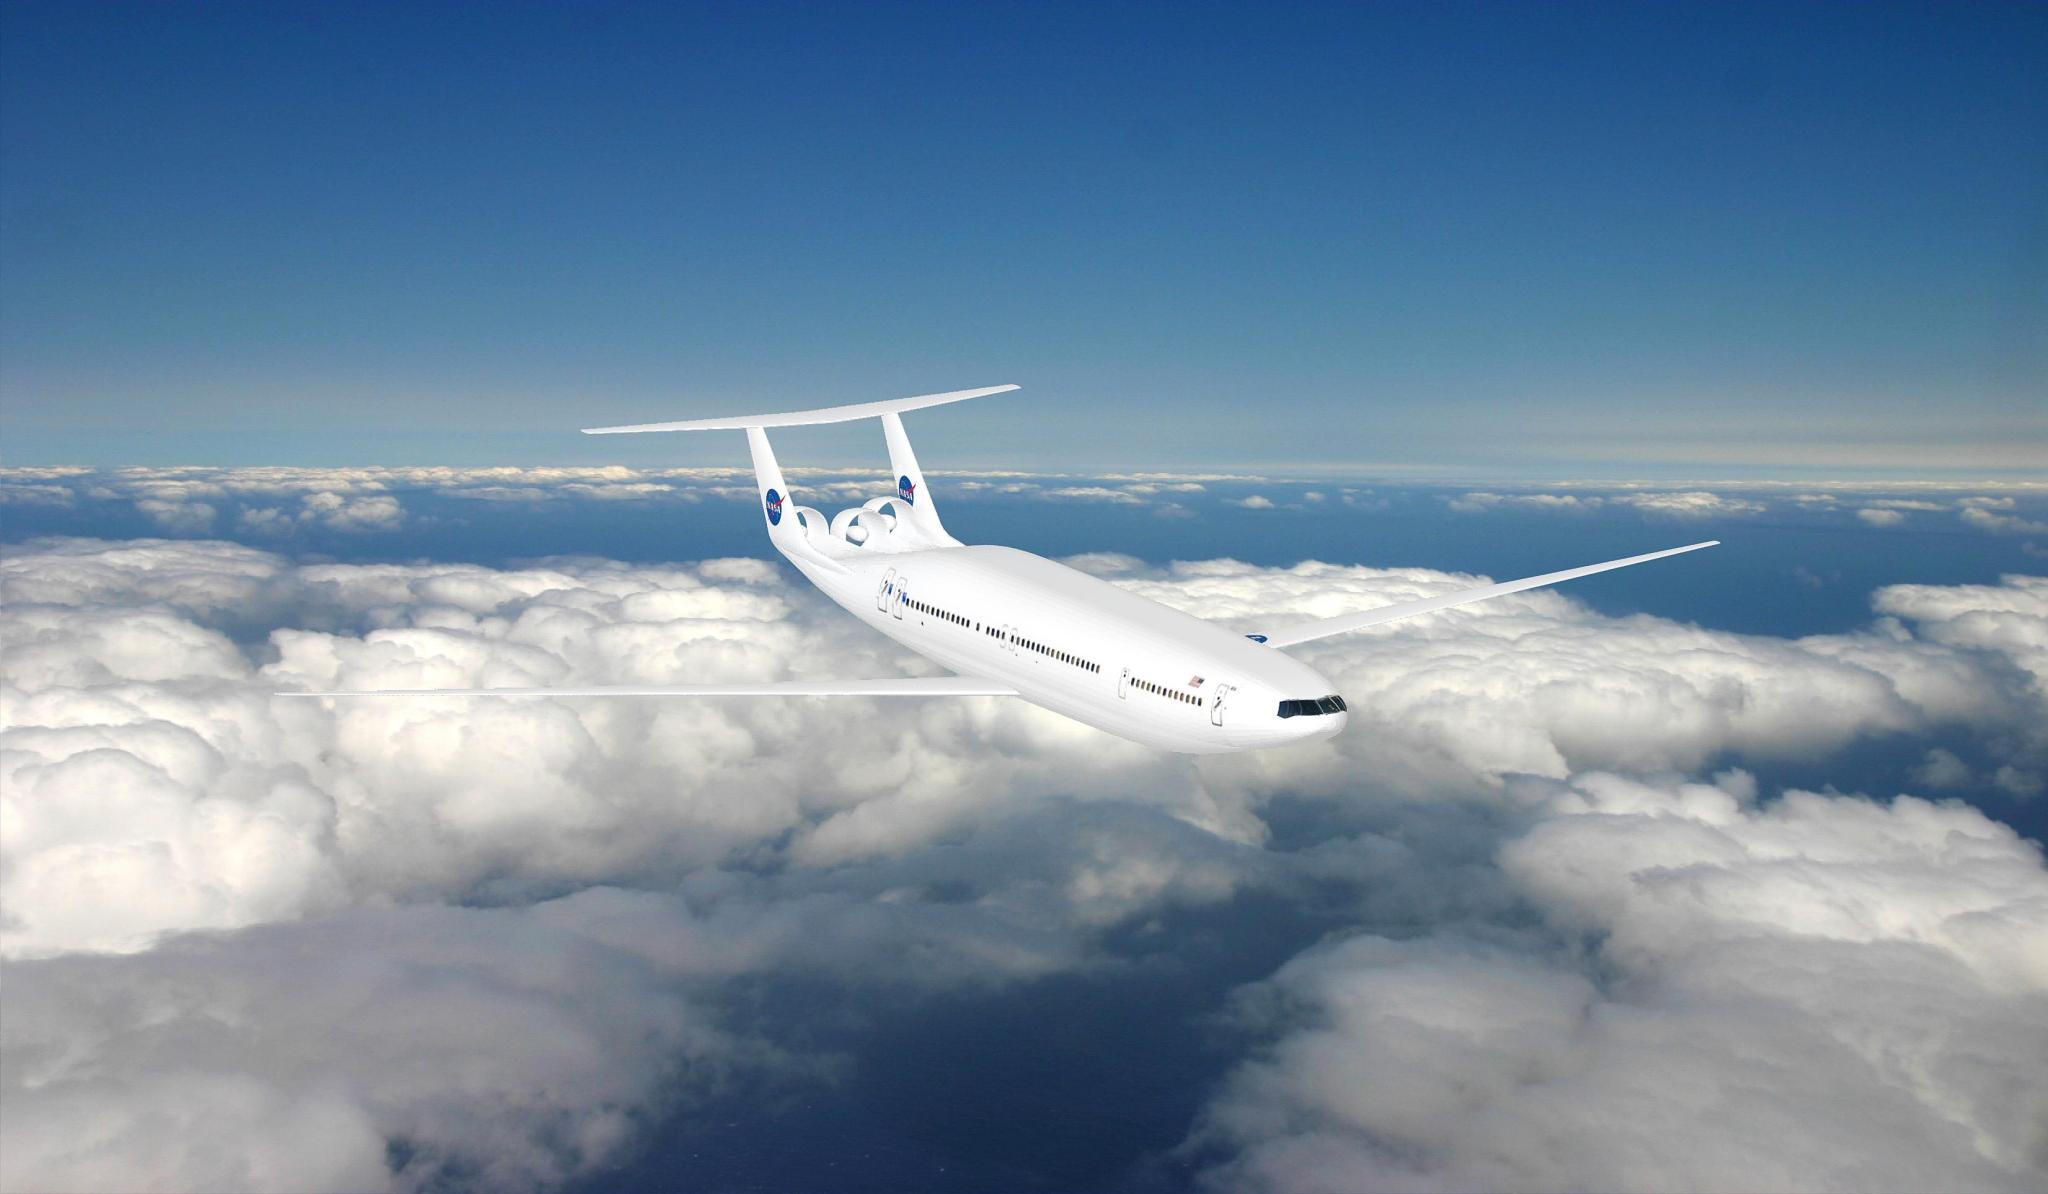 A graphic depicting an artist’s concept of the "double bubble" D8 Series aircraft design is shown in flight with clouds surrounding it. 